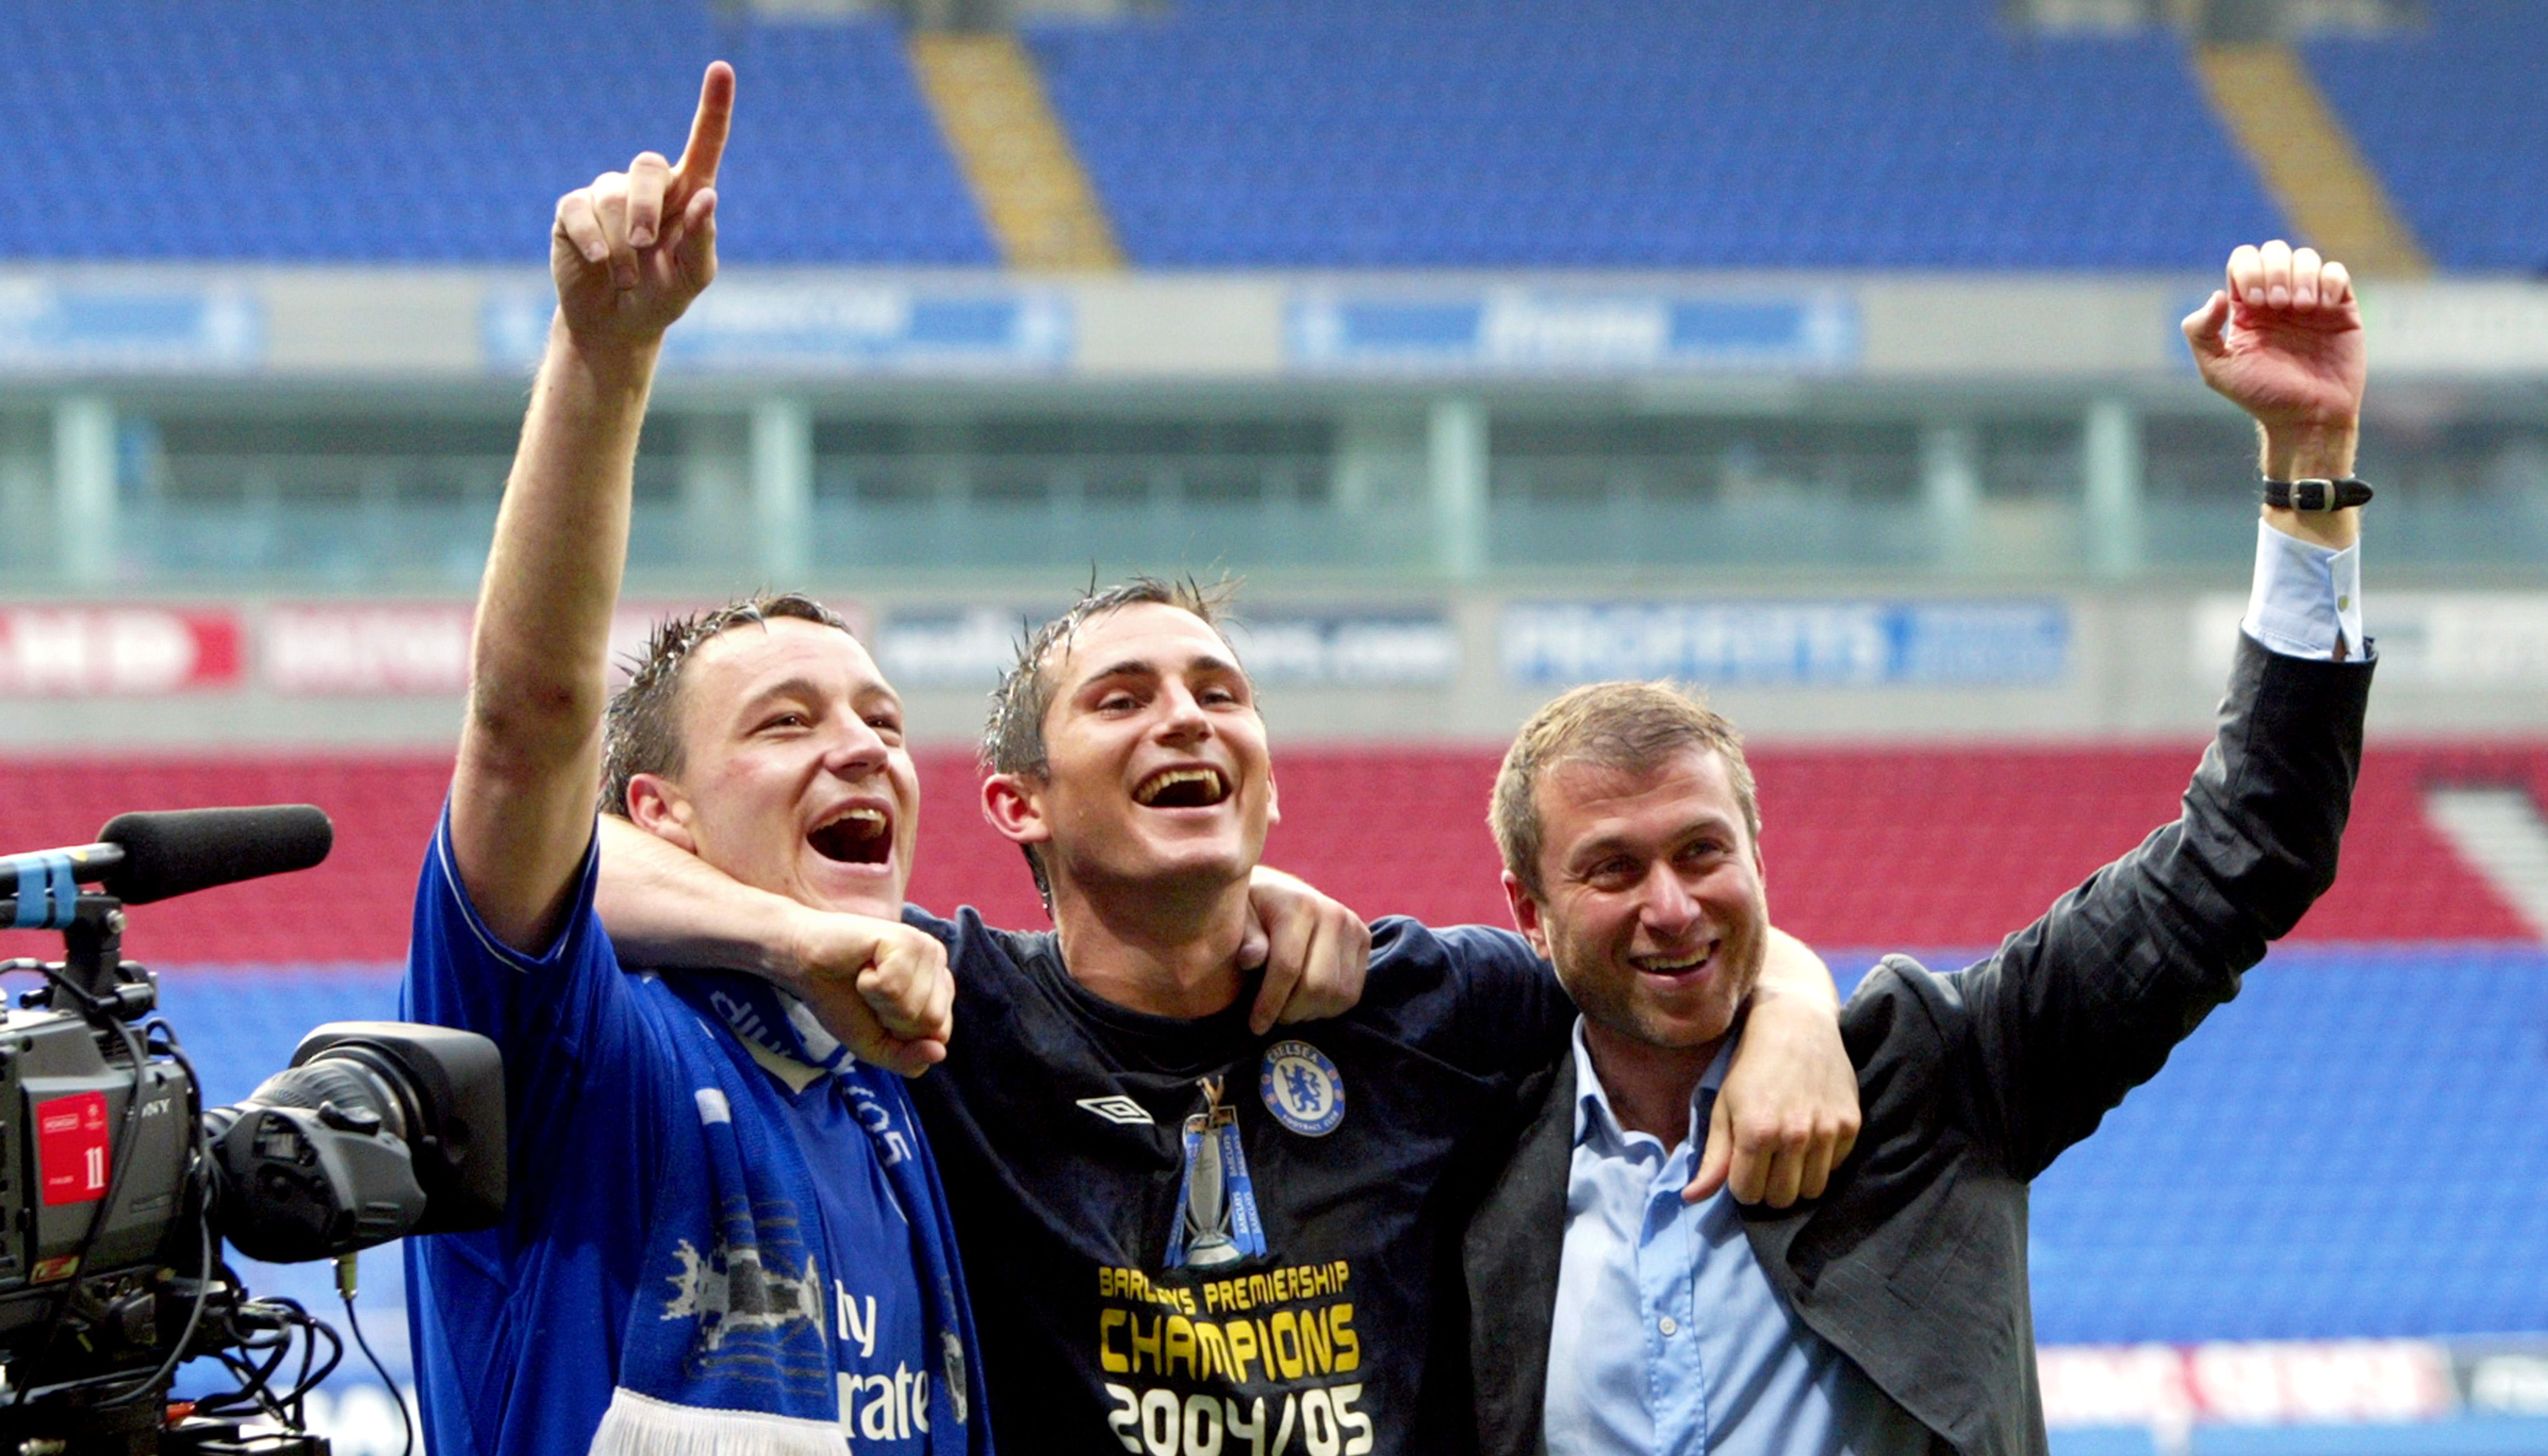 John Terry (L) celebrating with Chelsea owner Roman Abramovich